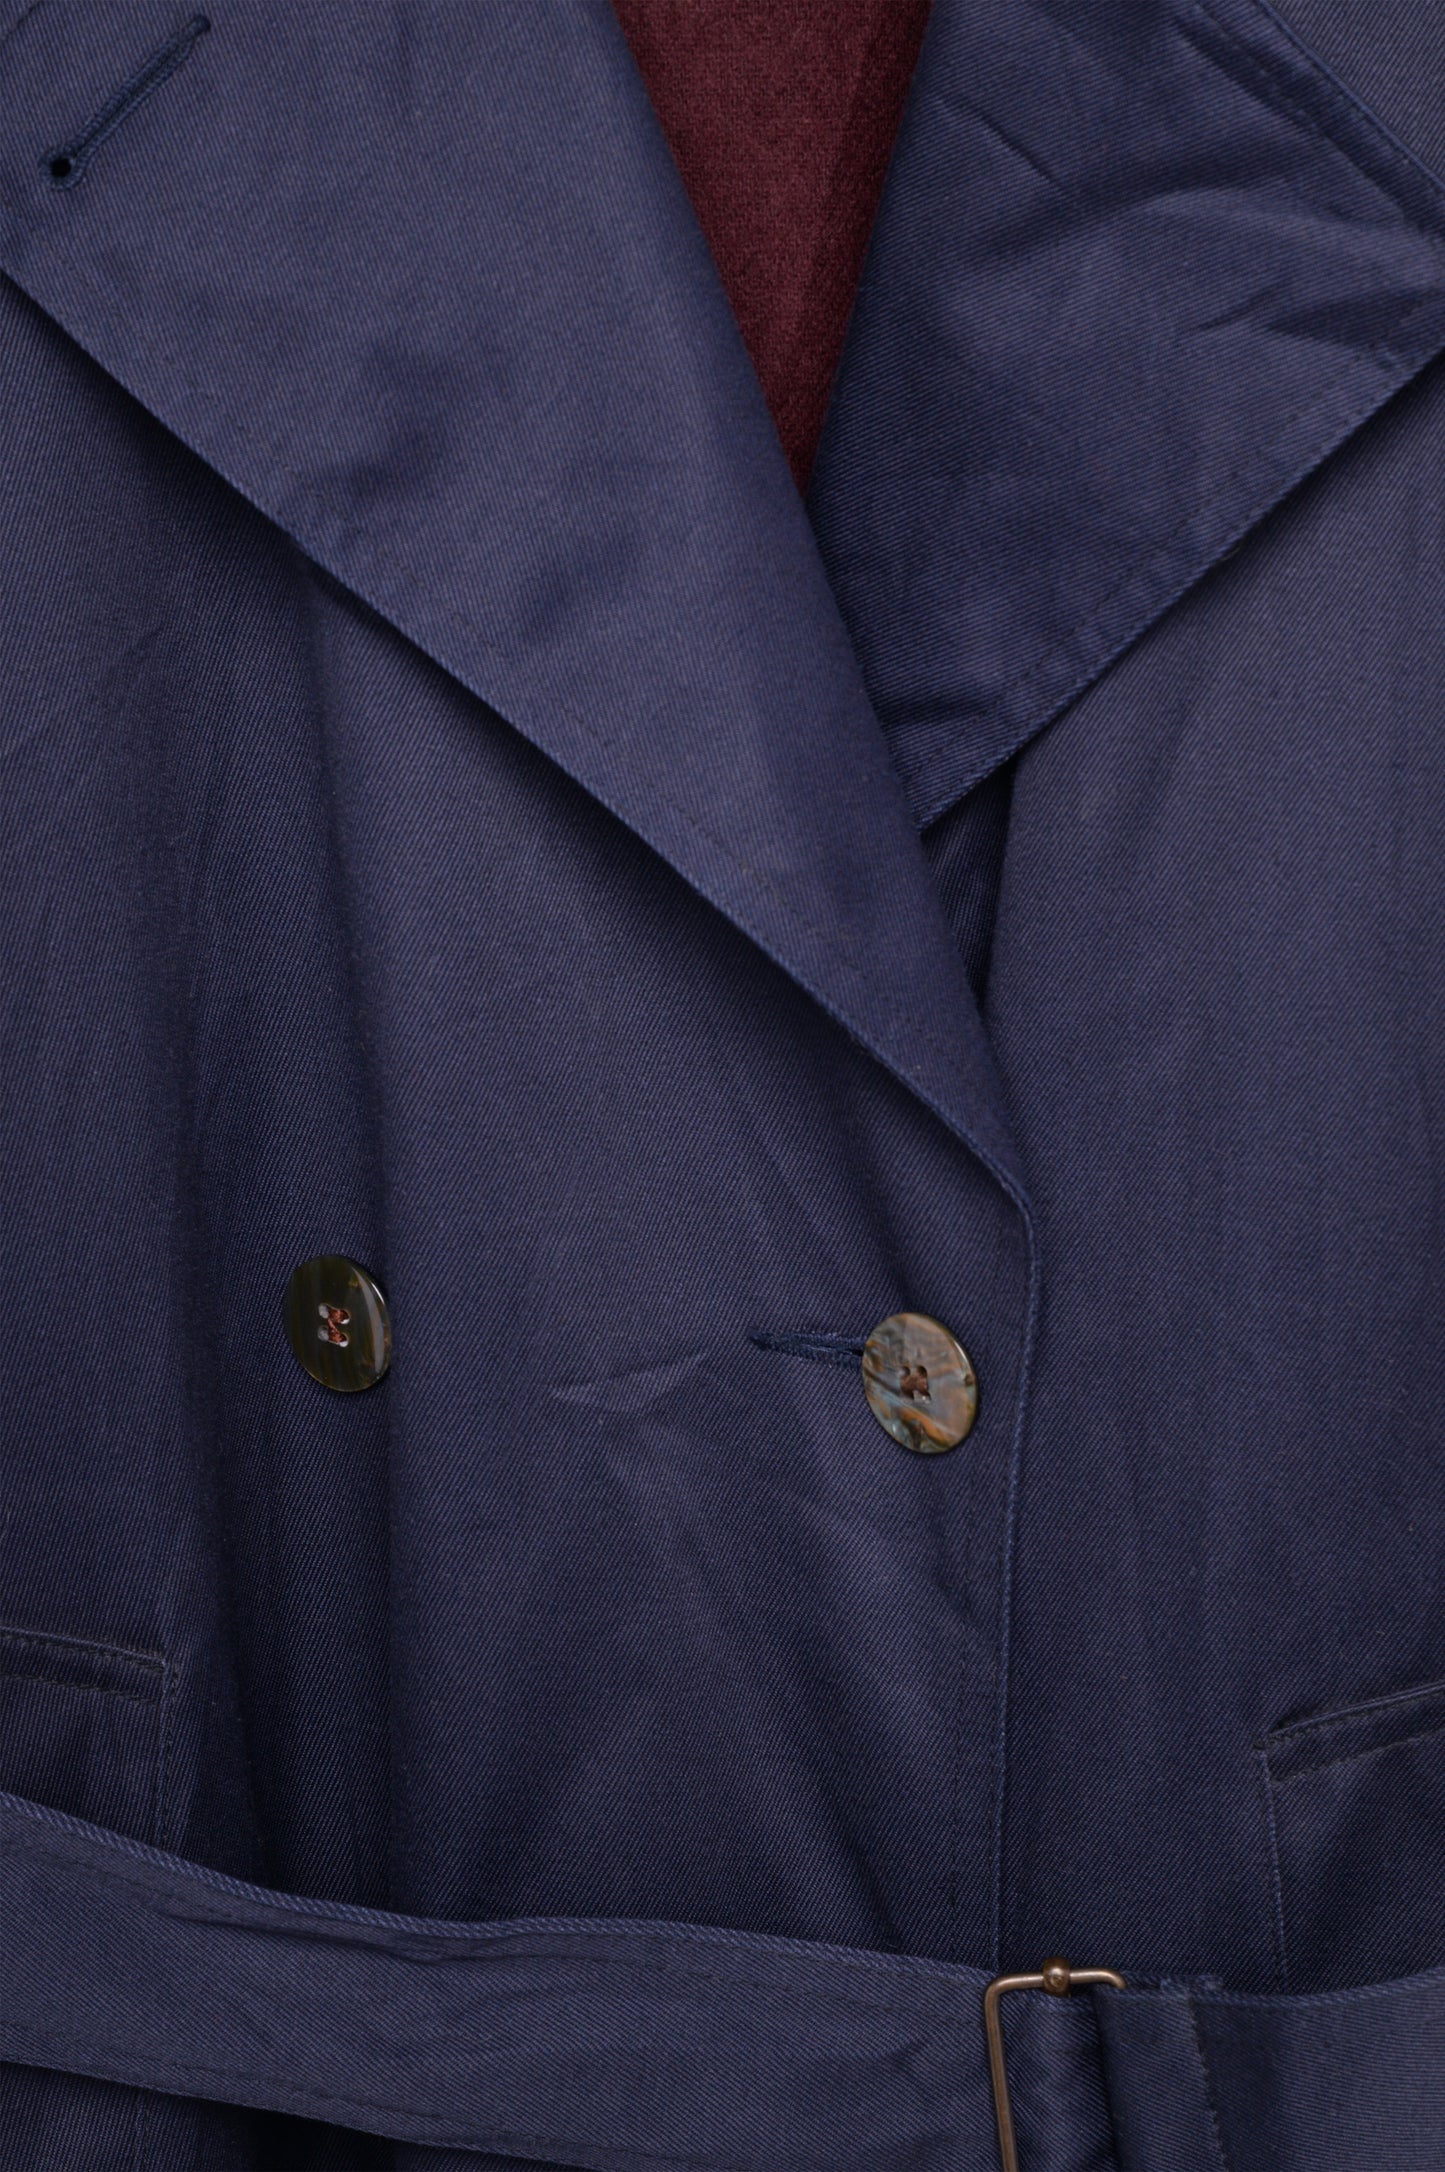 Belted Navy Trench Coat